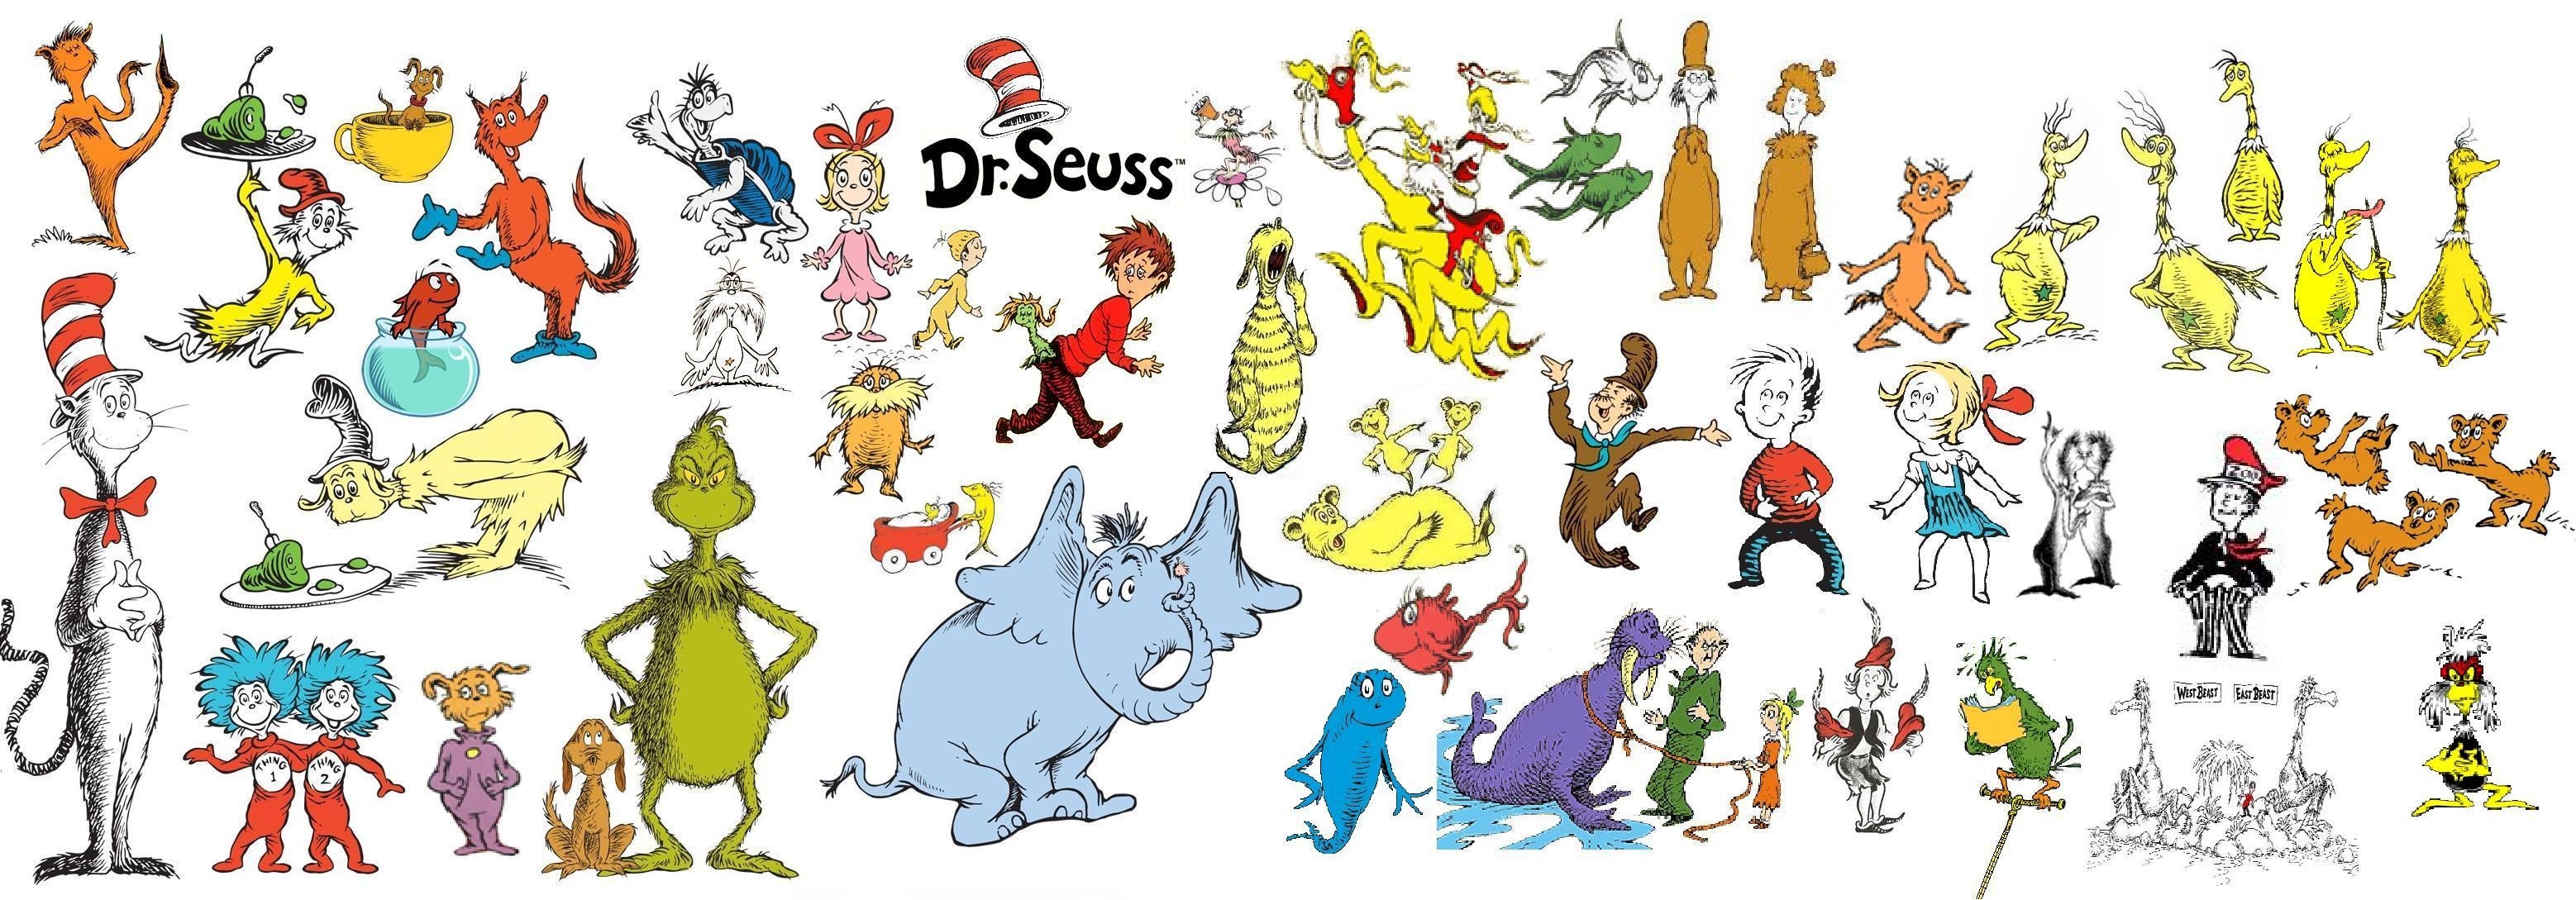 3116x1089 10 Dr. Seuss Quotes To Live By